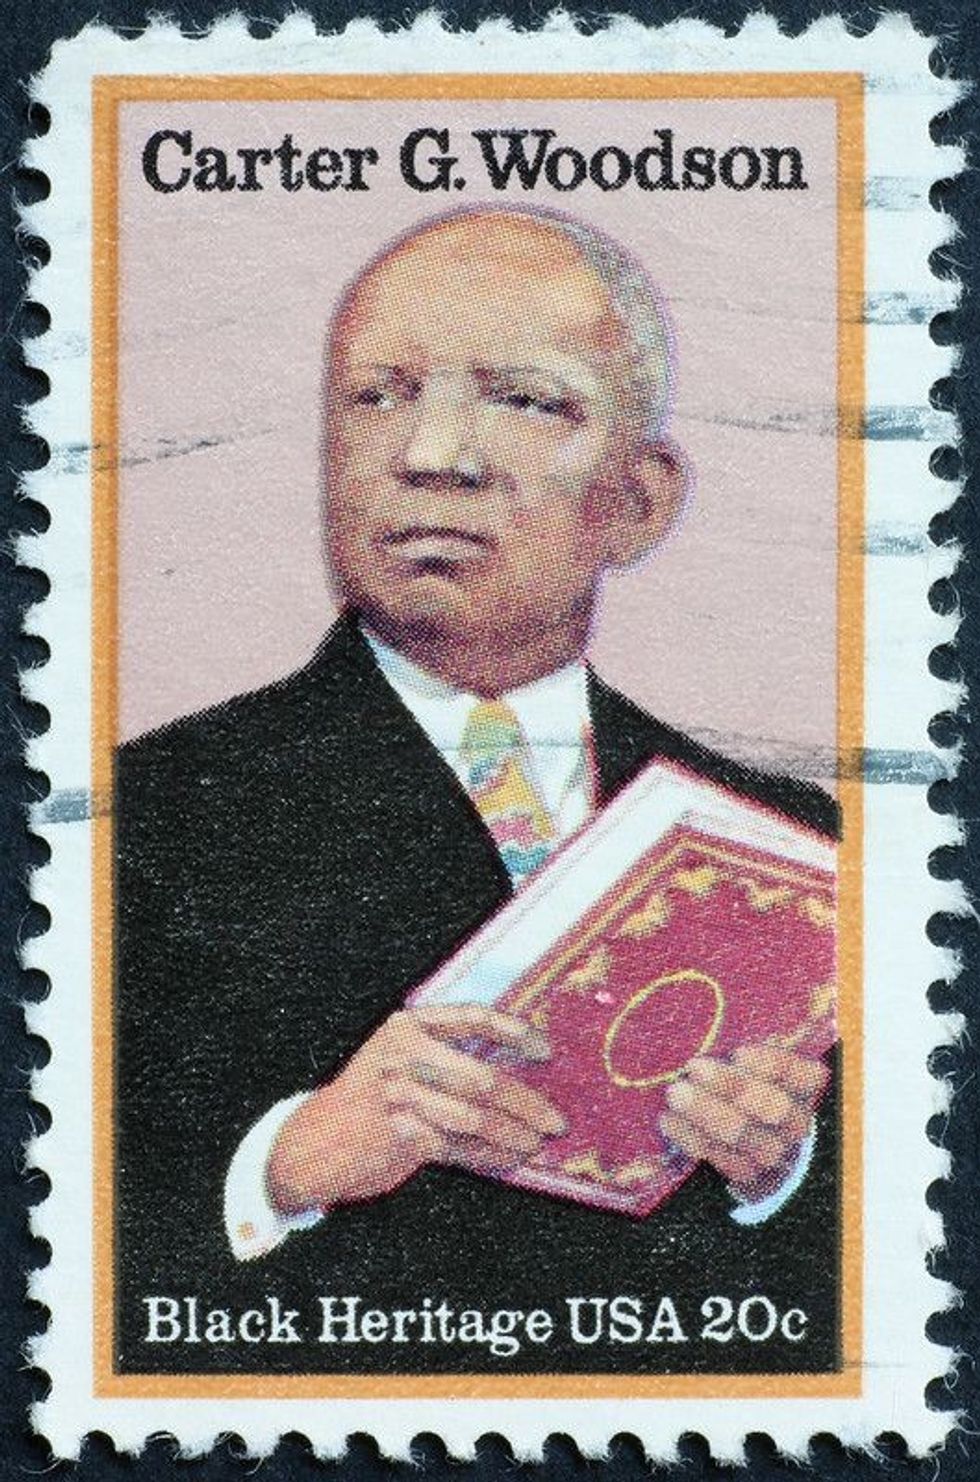 Stamp post of Carter G. Woodson